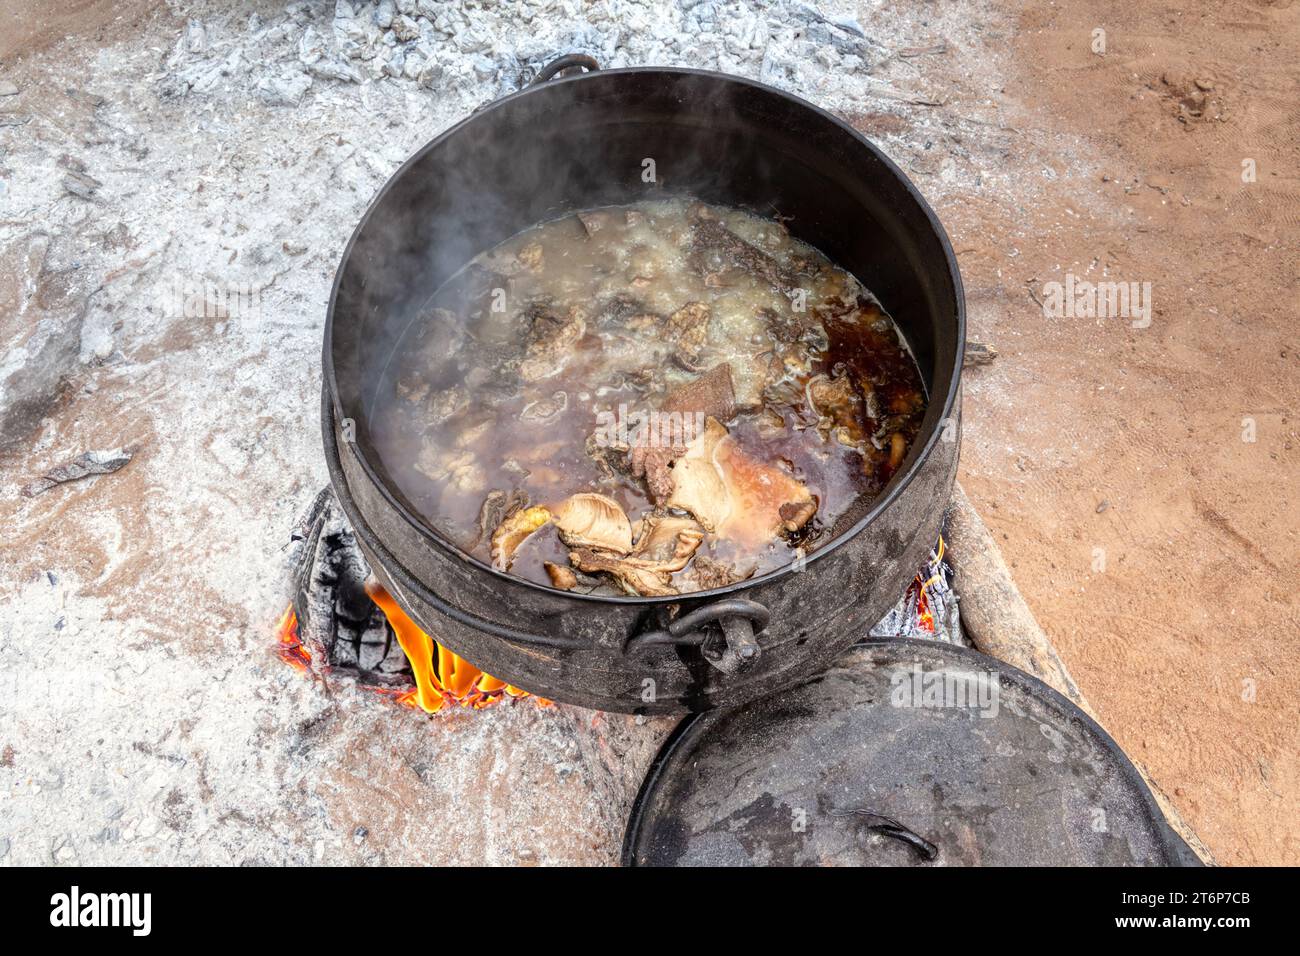 https://c8.alamy.com/comp/2T6P7CB/african-pot-outdoors-in-the-yard-kitchen-cooking-large-pieces-of-meat-tripe-and-fat-2T6P7CB.jpg